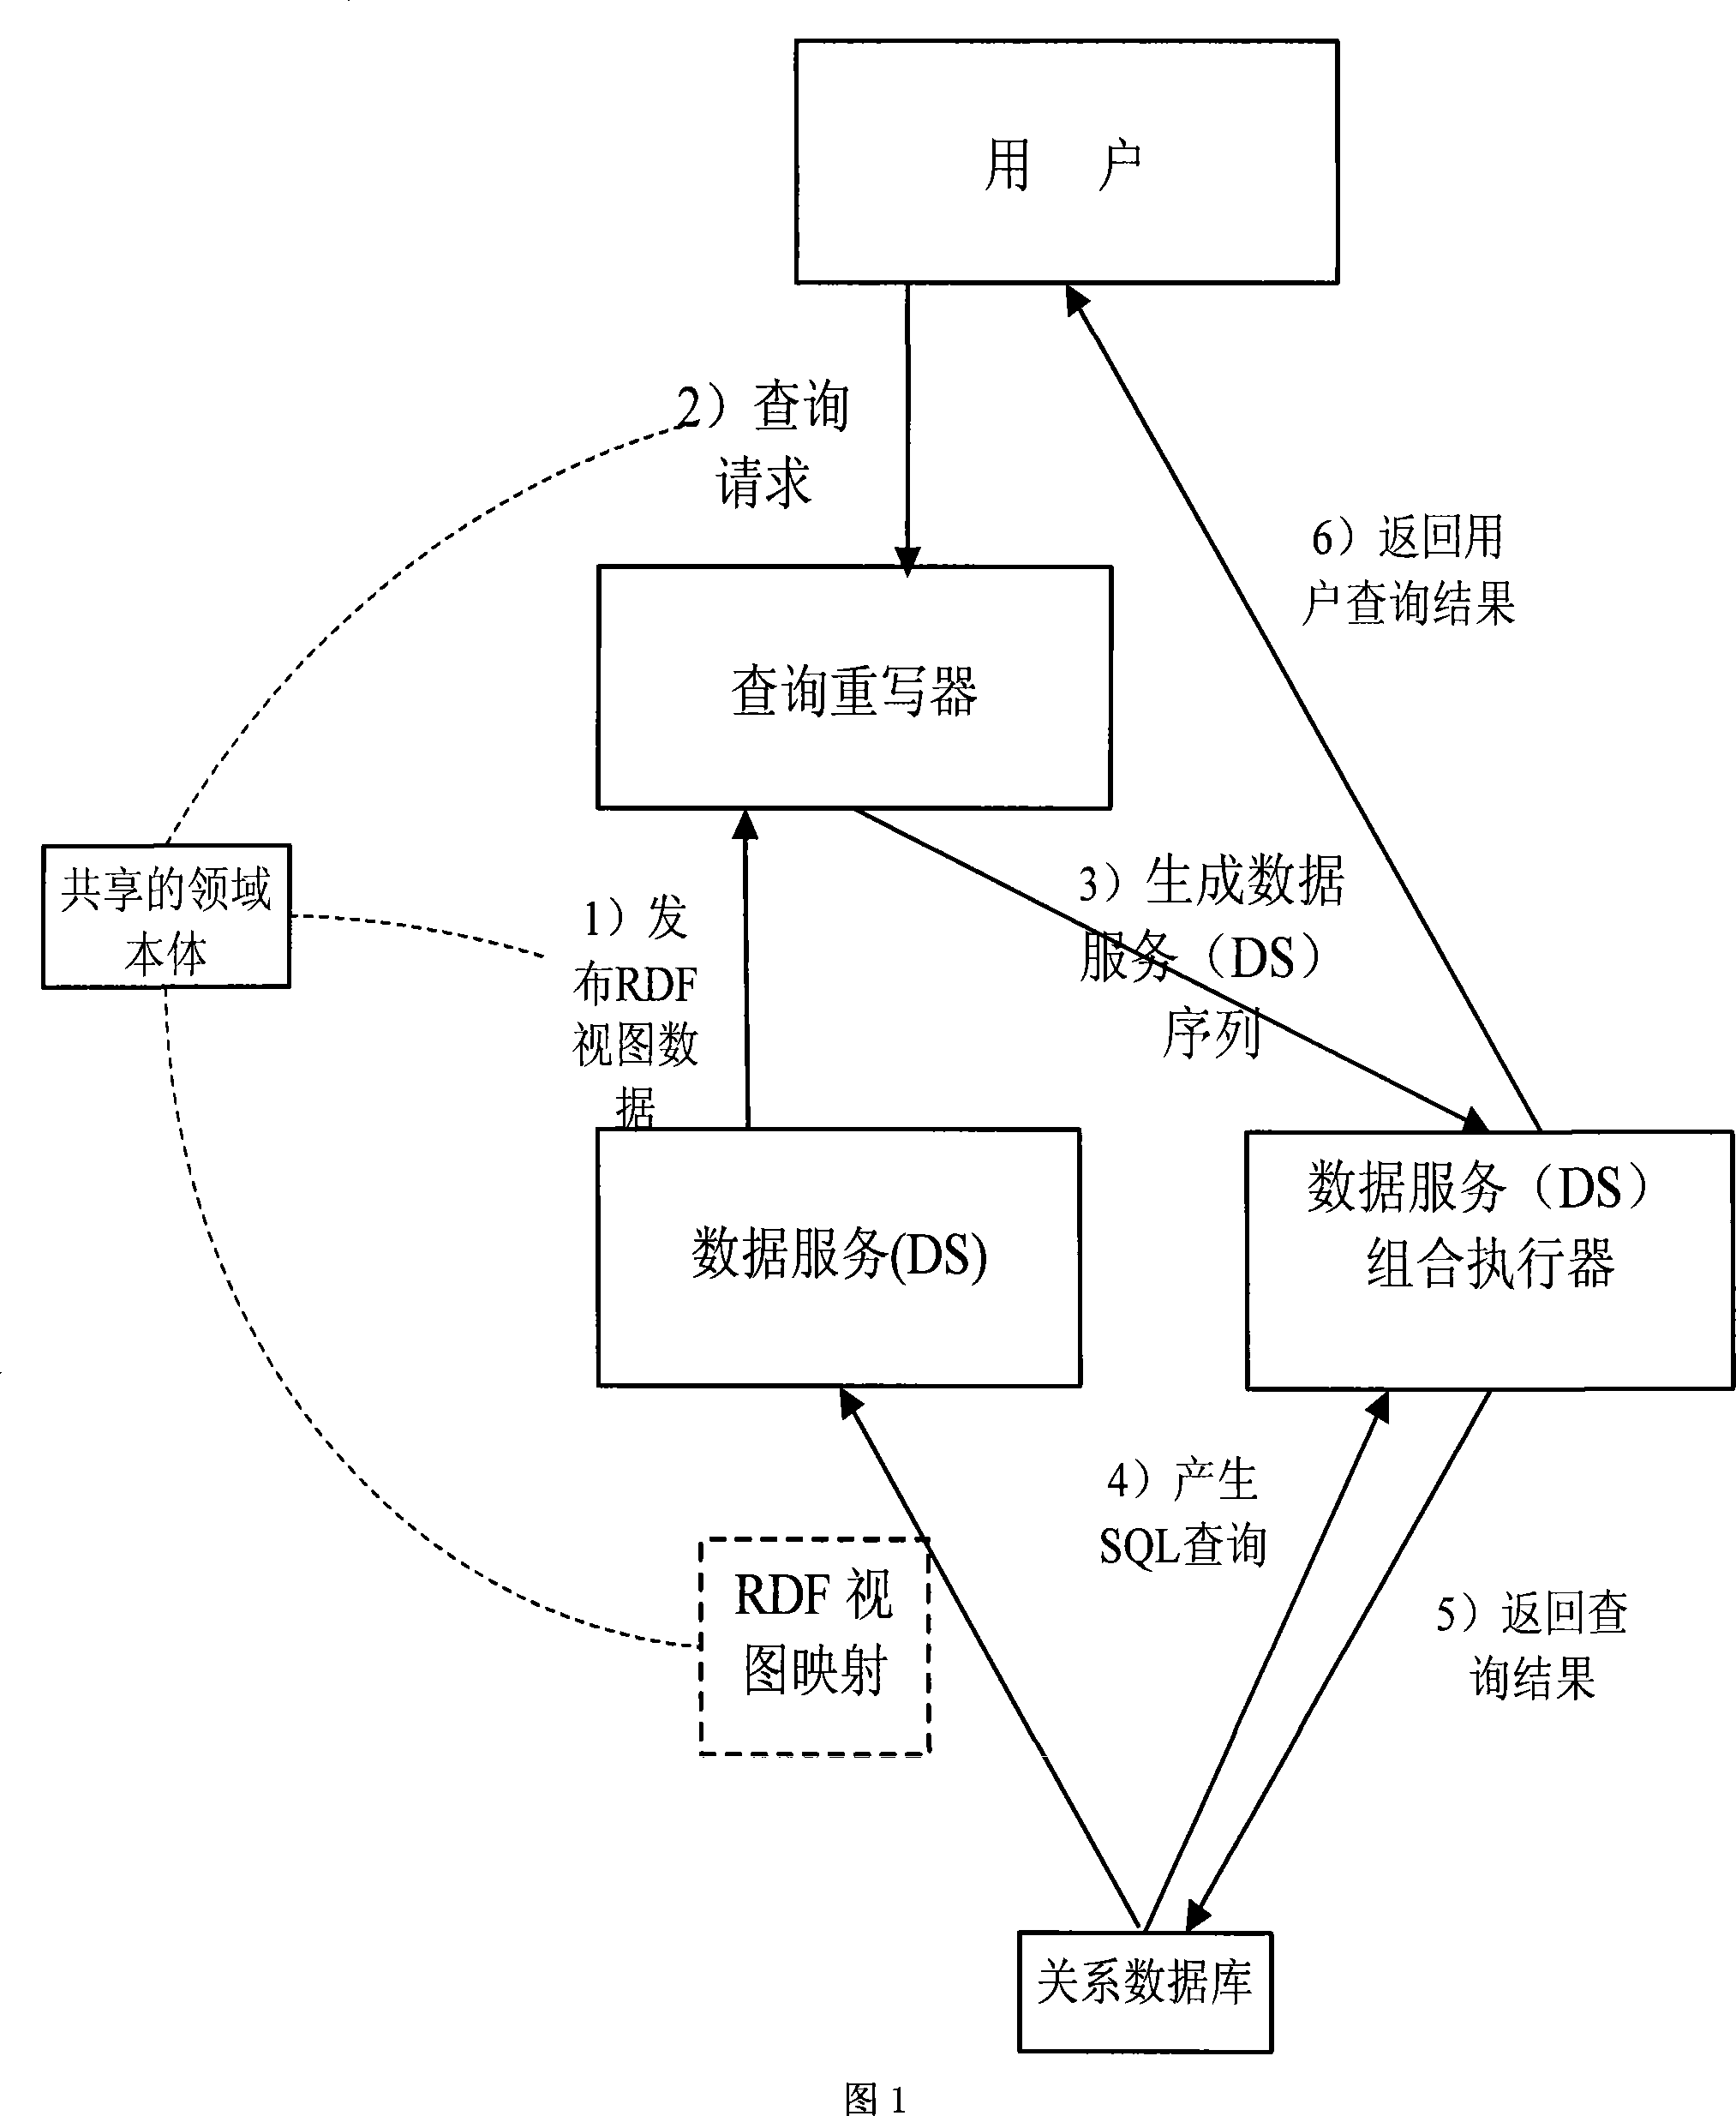 Flexible data service combined method based on semantic enquire overwrite